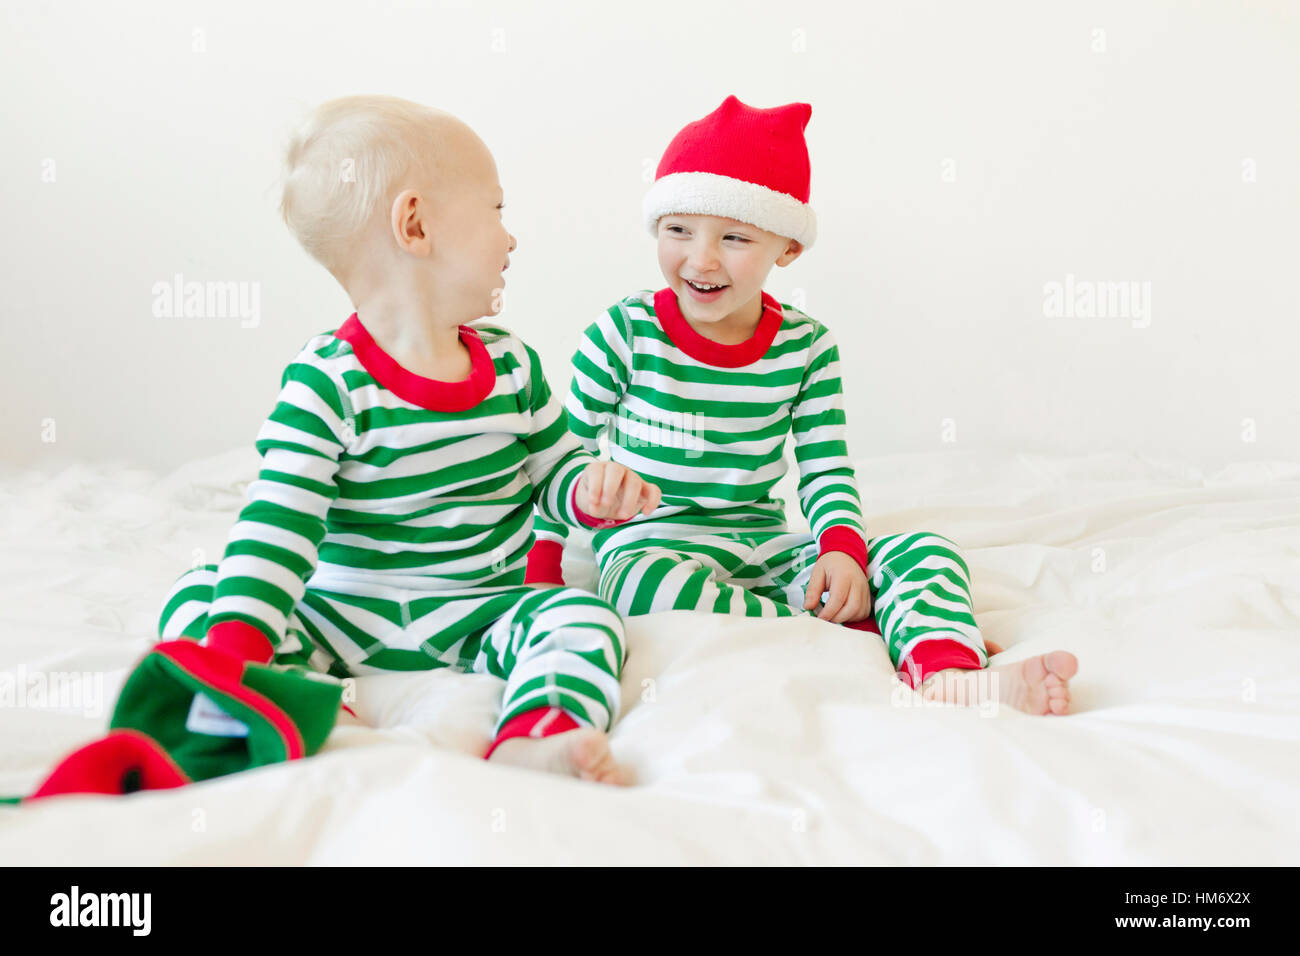 Siblings looking at each other while sitting on bed against white background Stock Photo